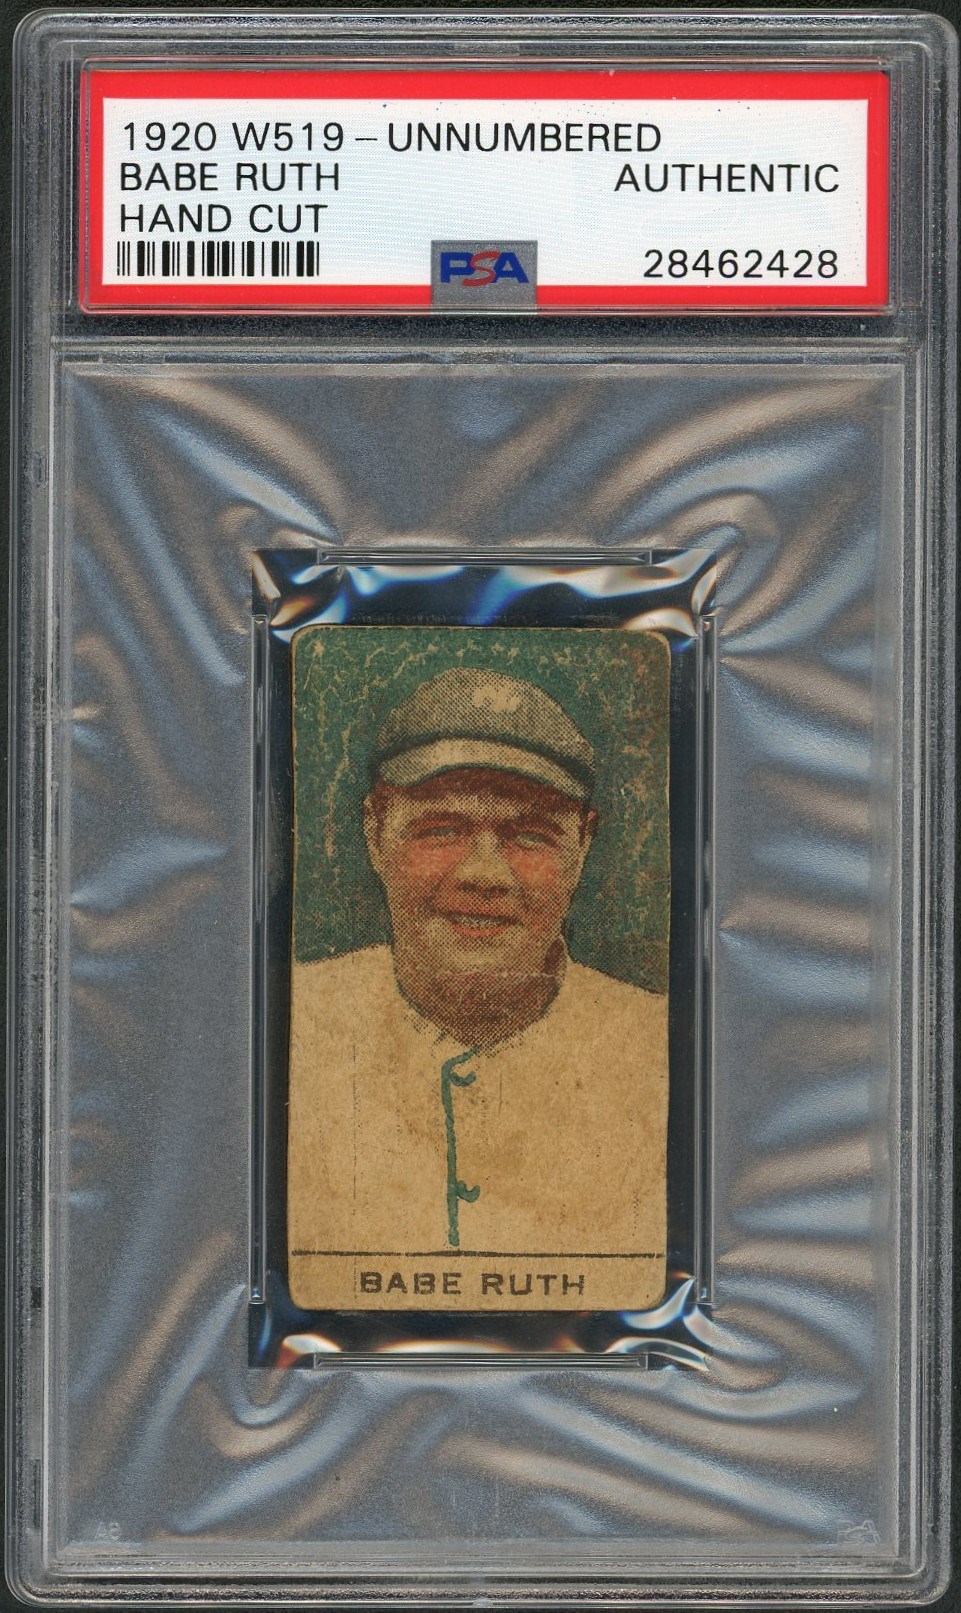 1920 W519 Unnumbered Babe Ruth (Hand Cut) - PSA AUTHENTIC